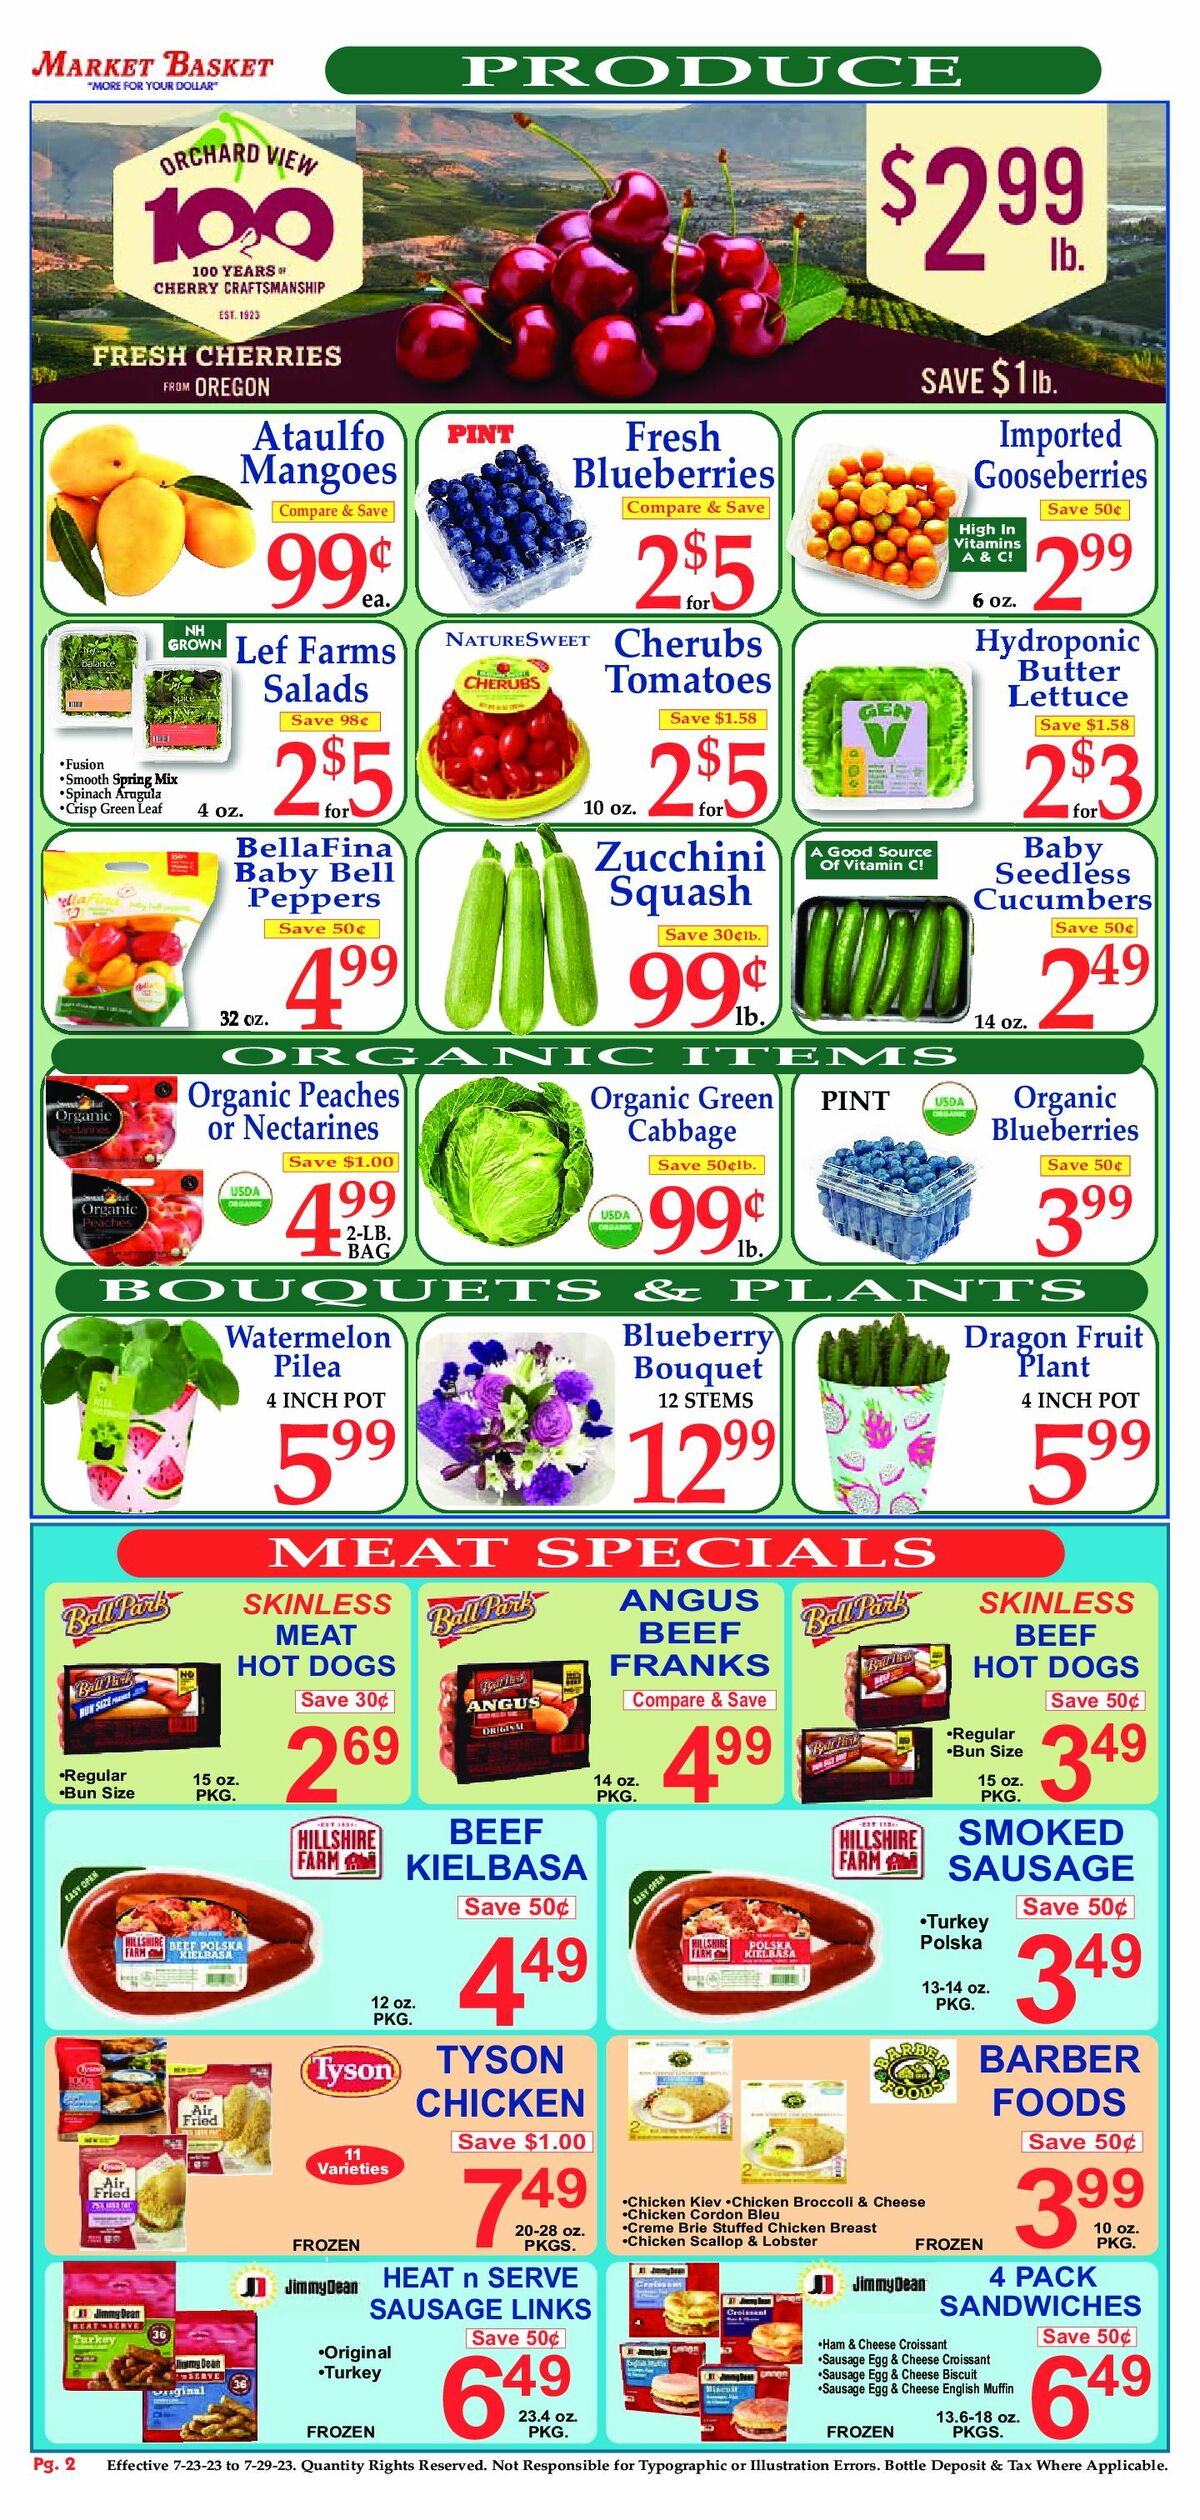 Market Basket Weekly Ad from July 23